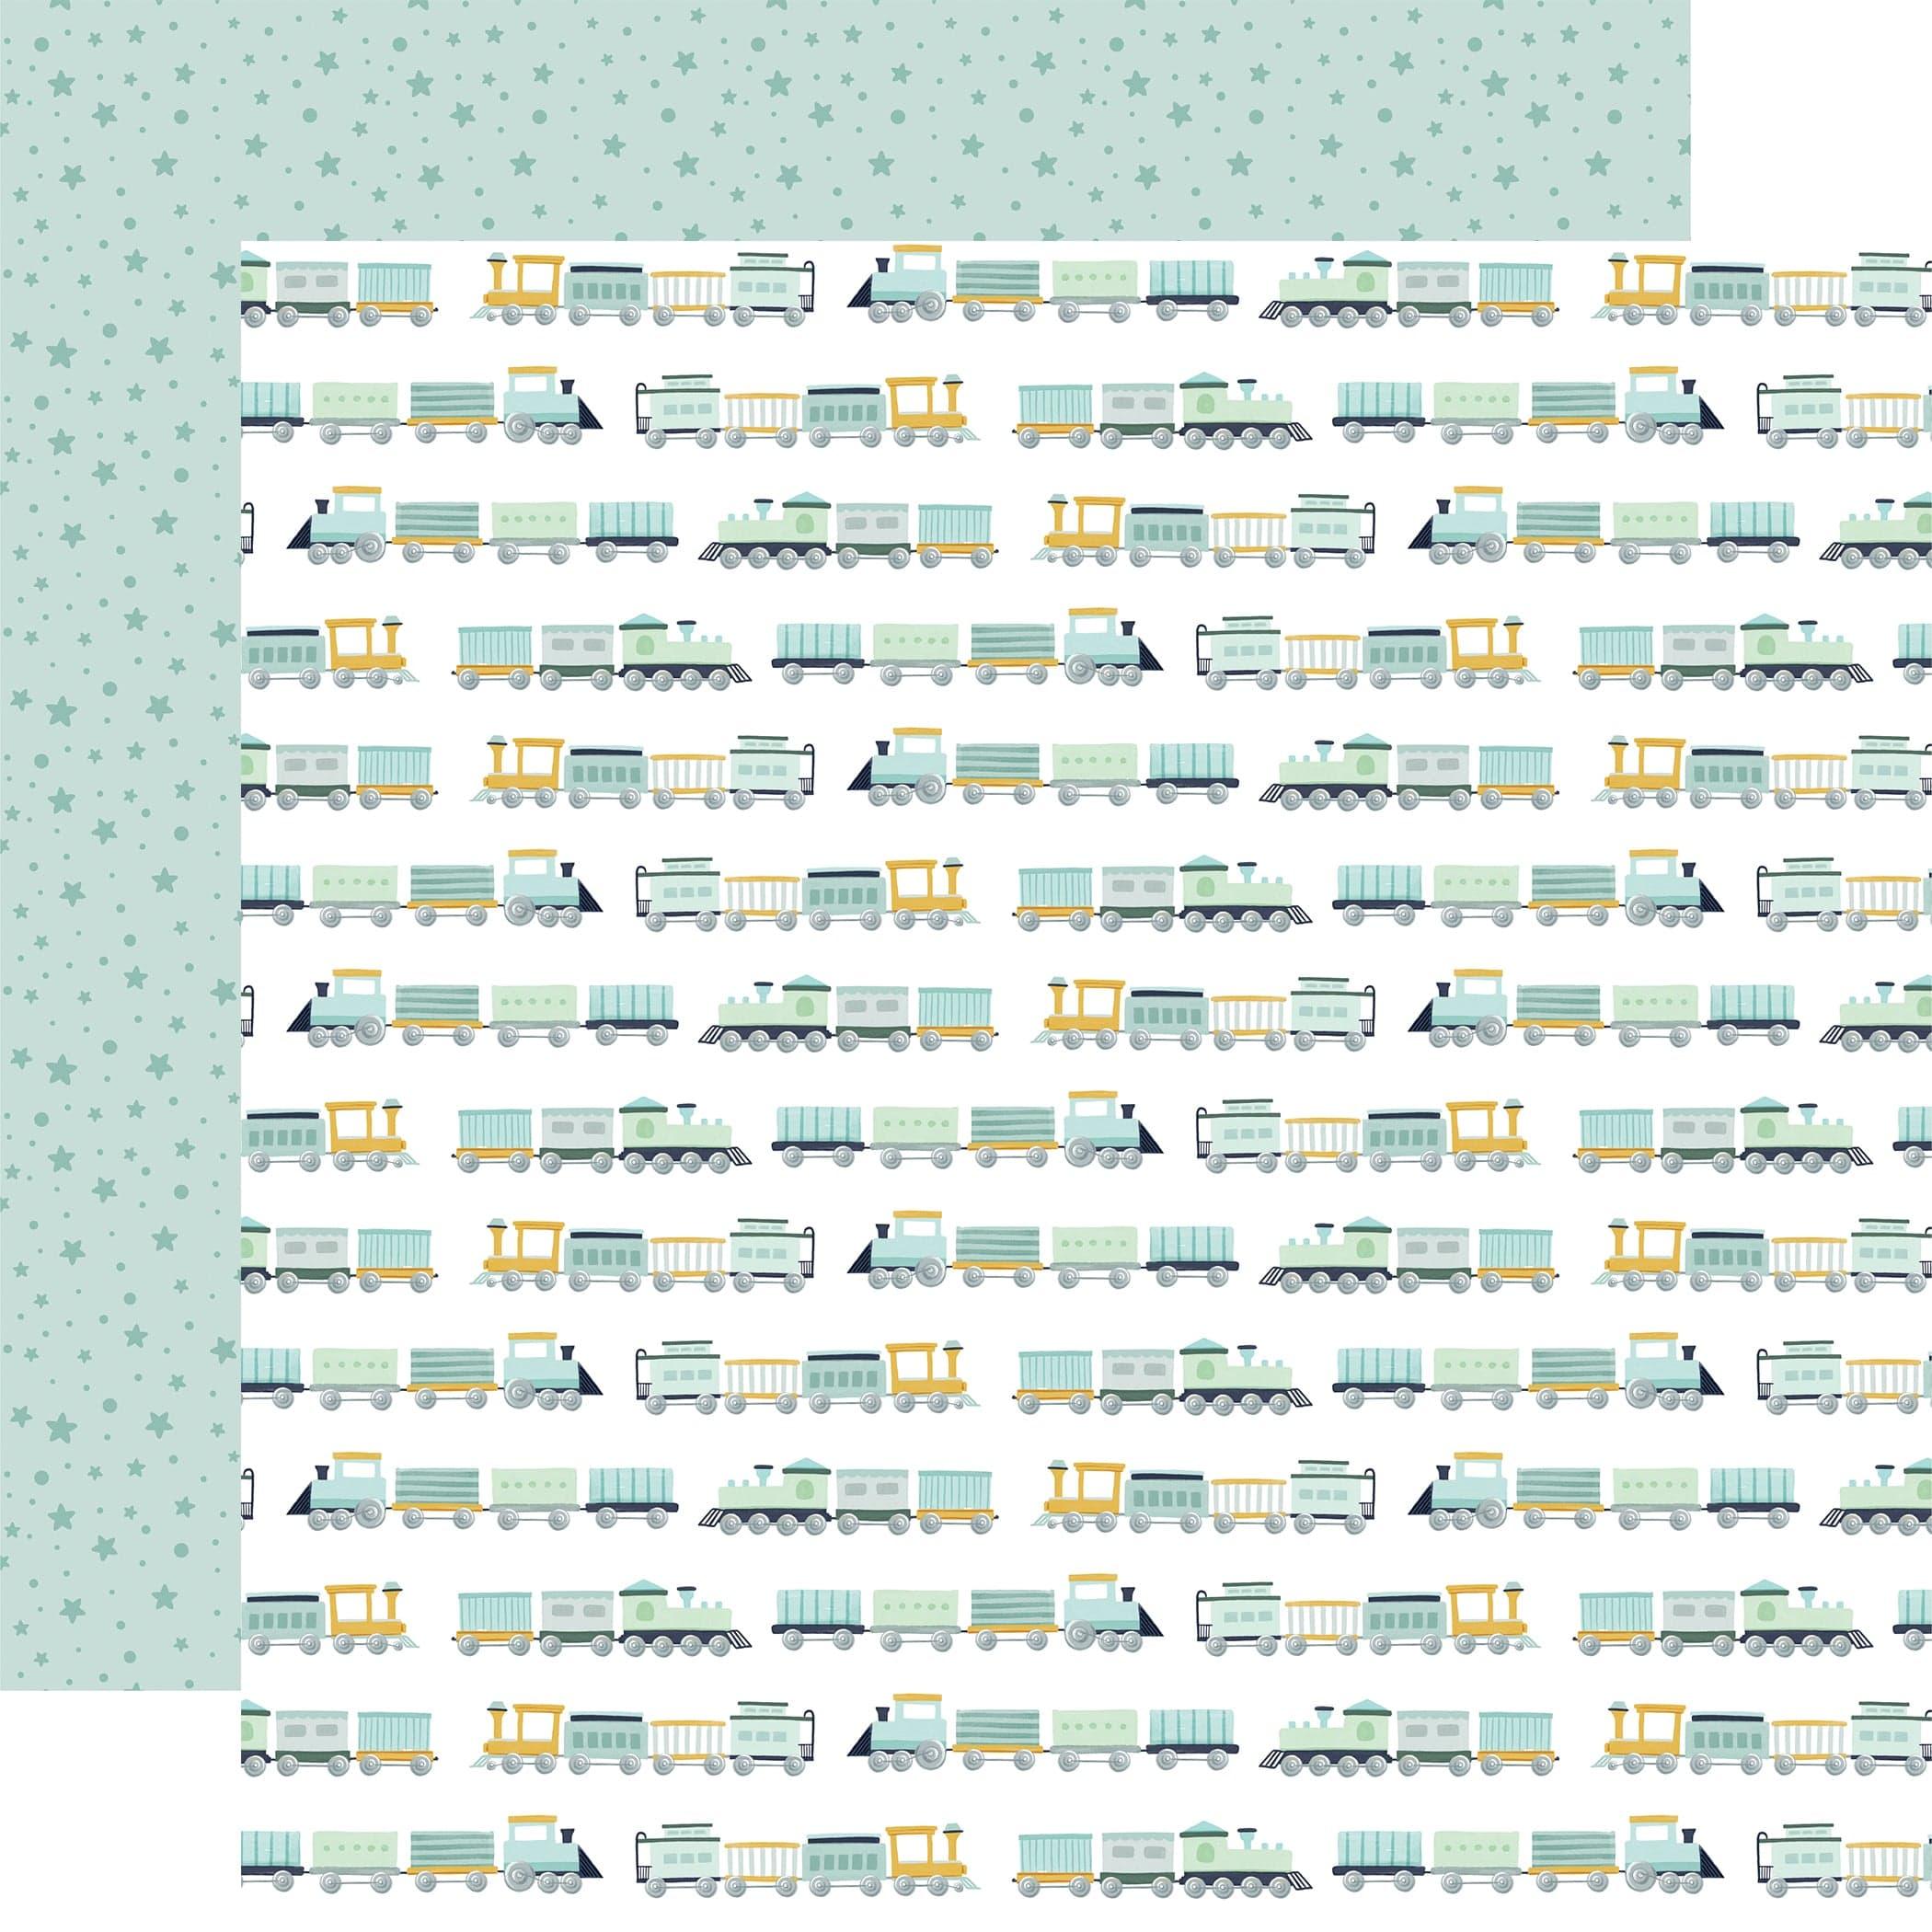 It's A Boy Collection Catch The Train 12 x 12 Double-Sided Scrapbook Paper by Echo Park Paper - Scrapbook Supply Companies